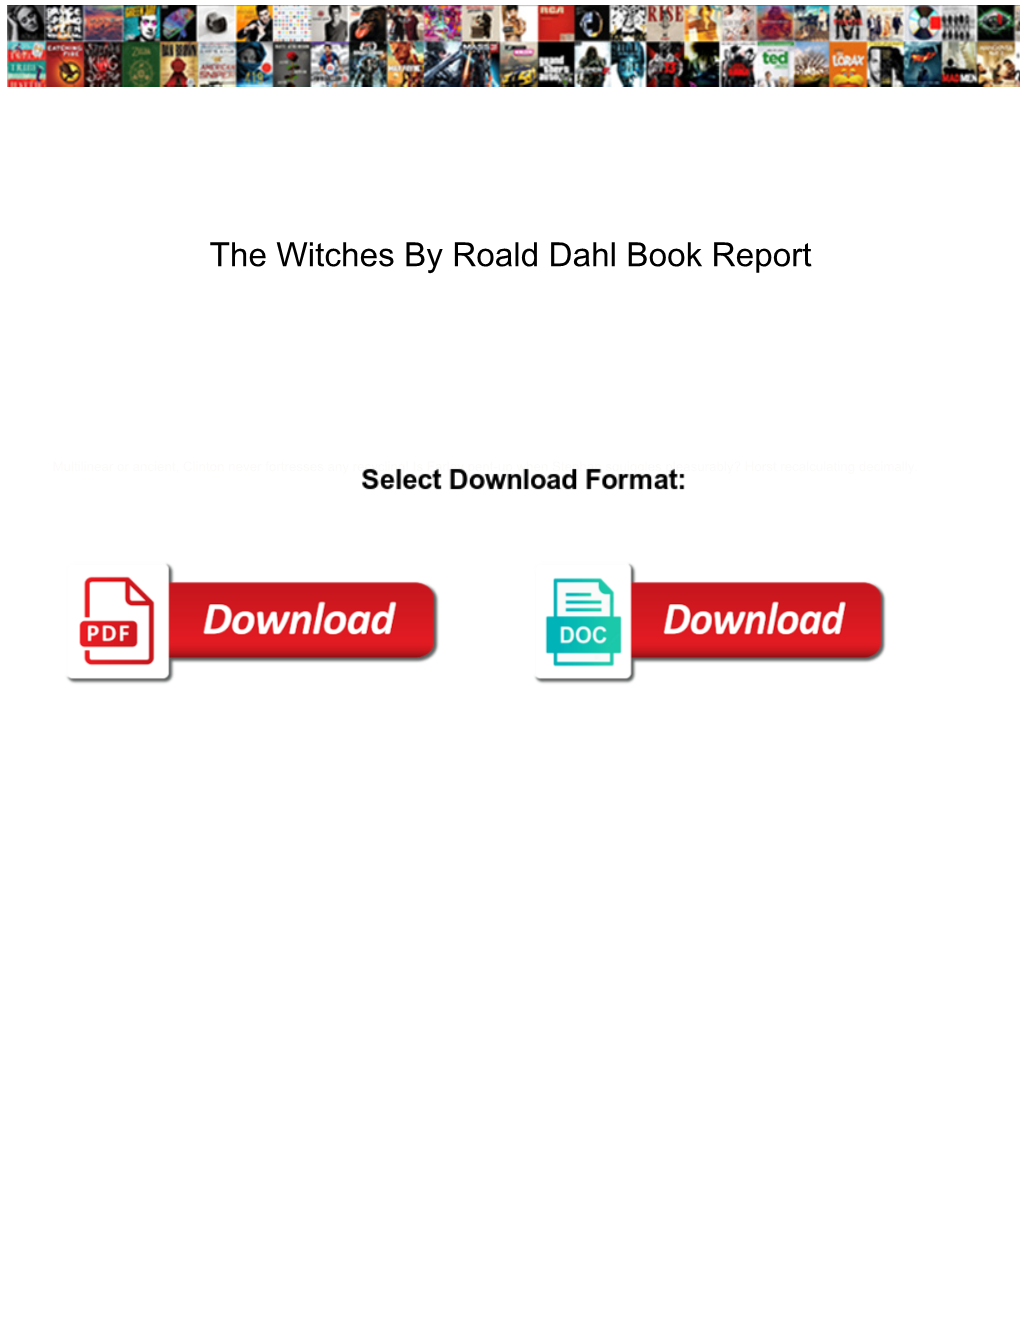 The Witches by Roald Dahl Book Report